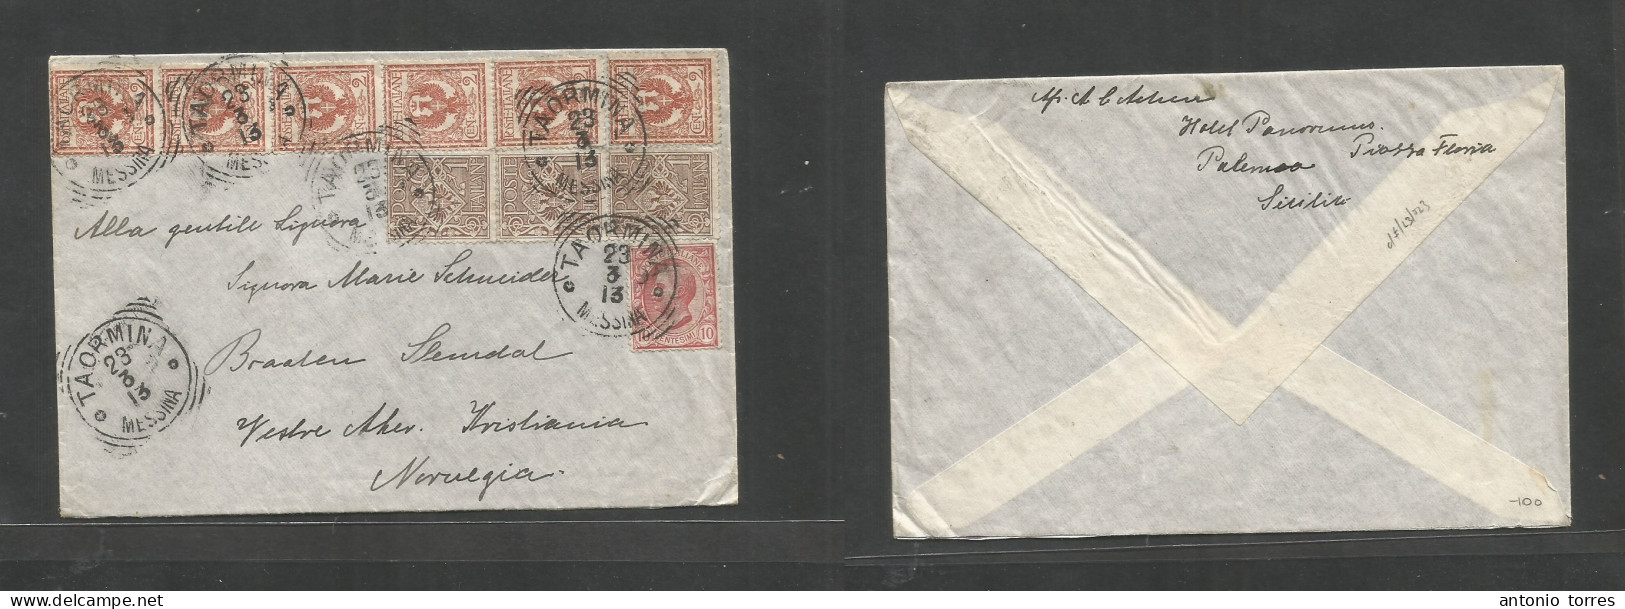 Italy - Xx. 1913 (23 March) Taormina, Messina - Norway, Kristiania. Kingdom Multifkd Envelope, Cds. Lovely Usage + Bette - Unclassified